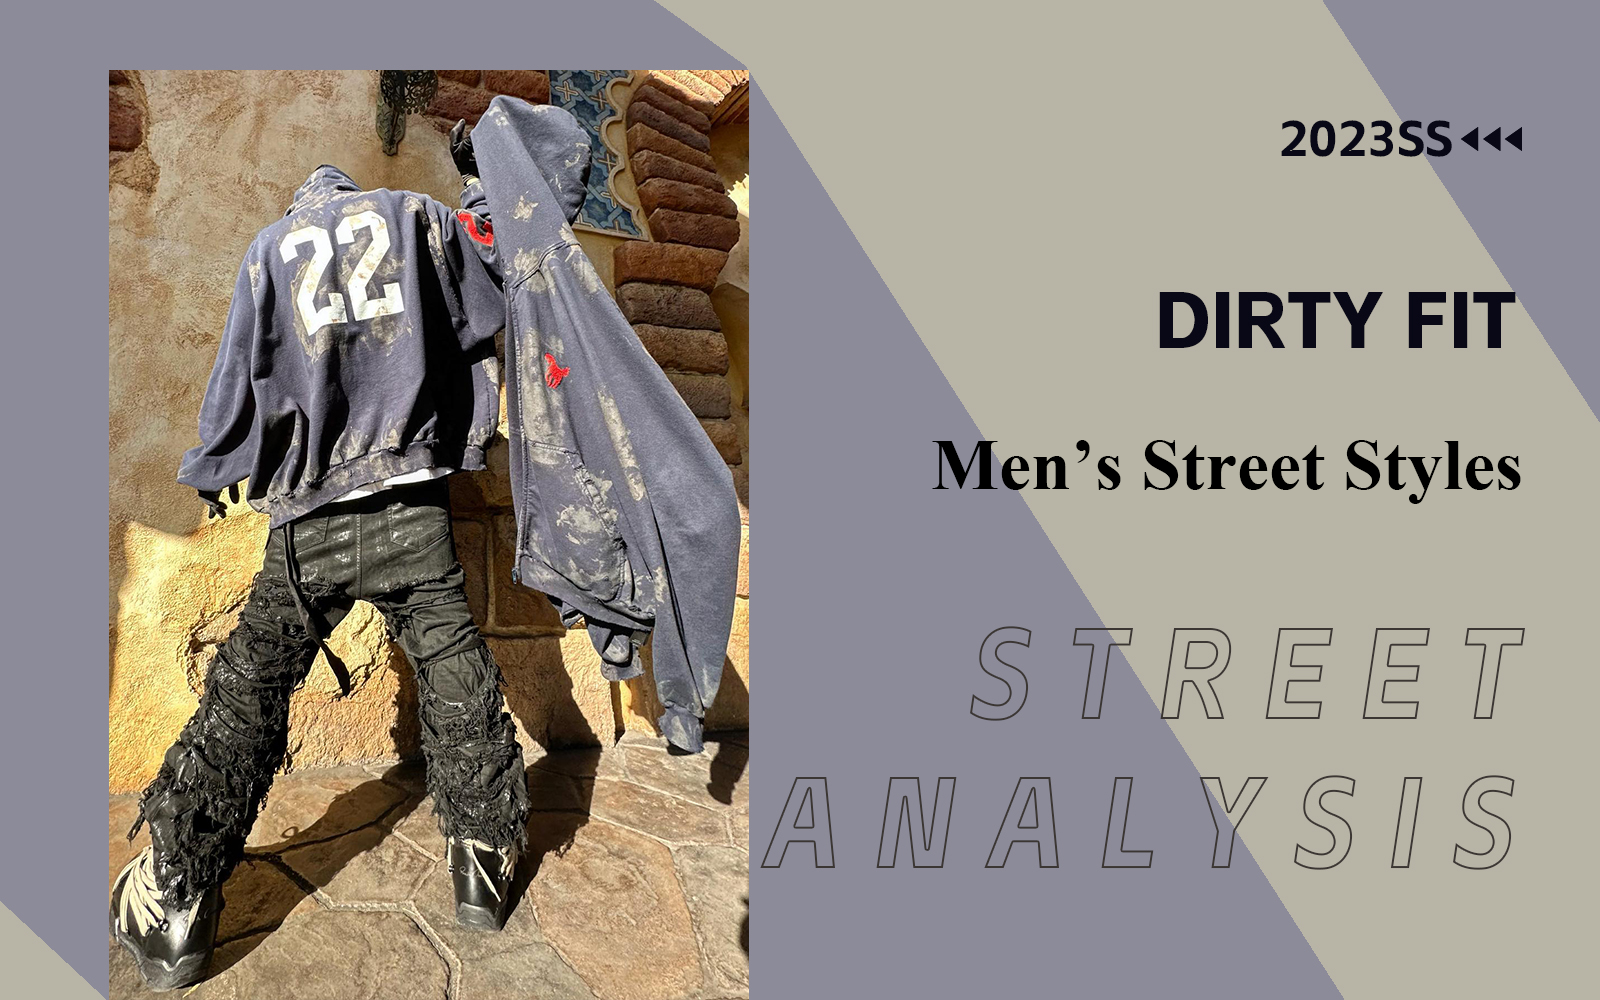 Dirty Fit -- The Analysis of Men's Street Styles